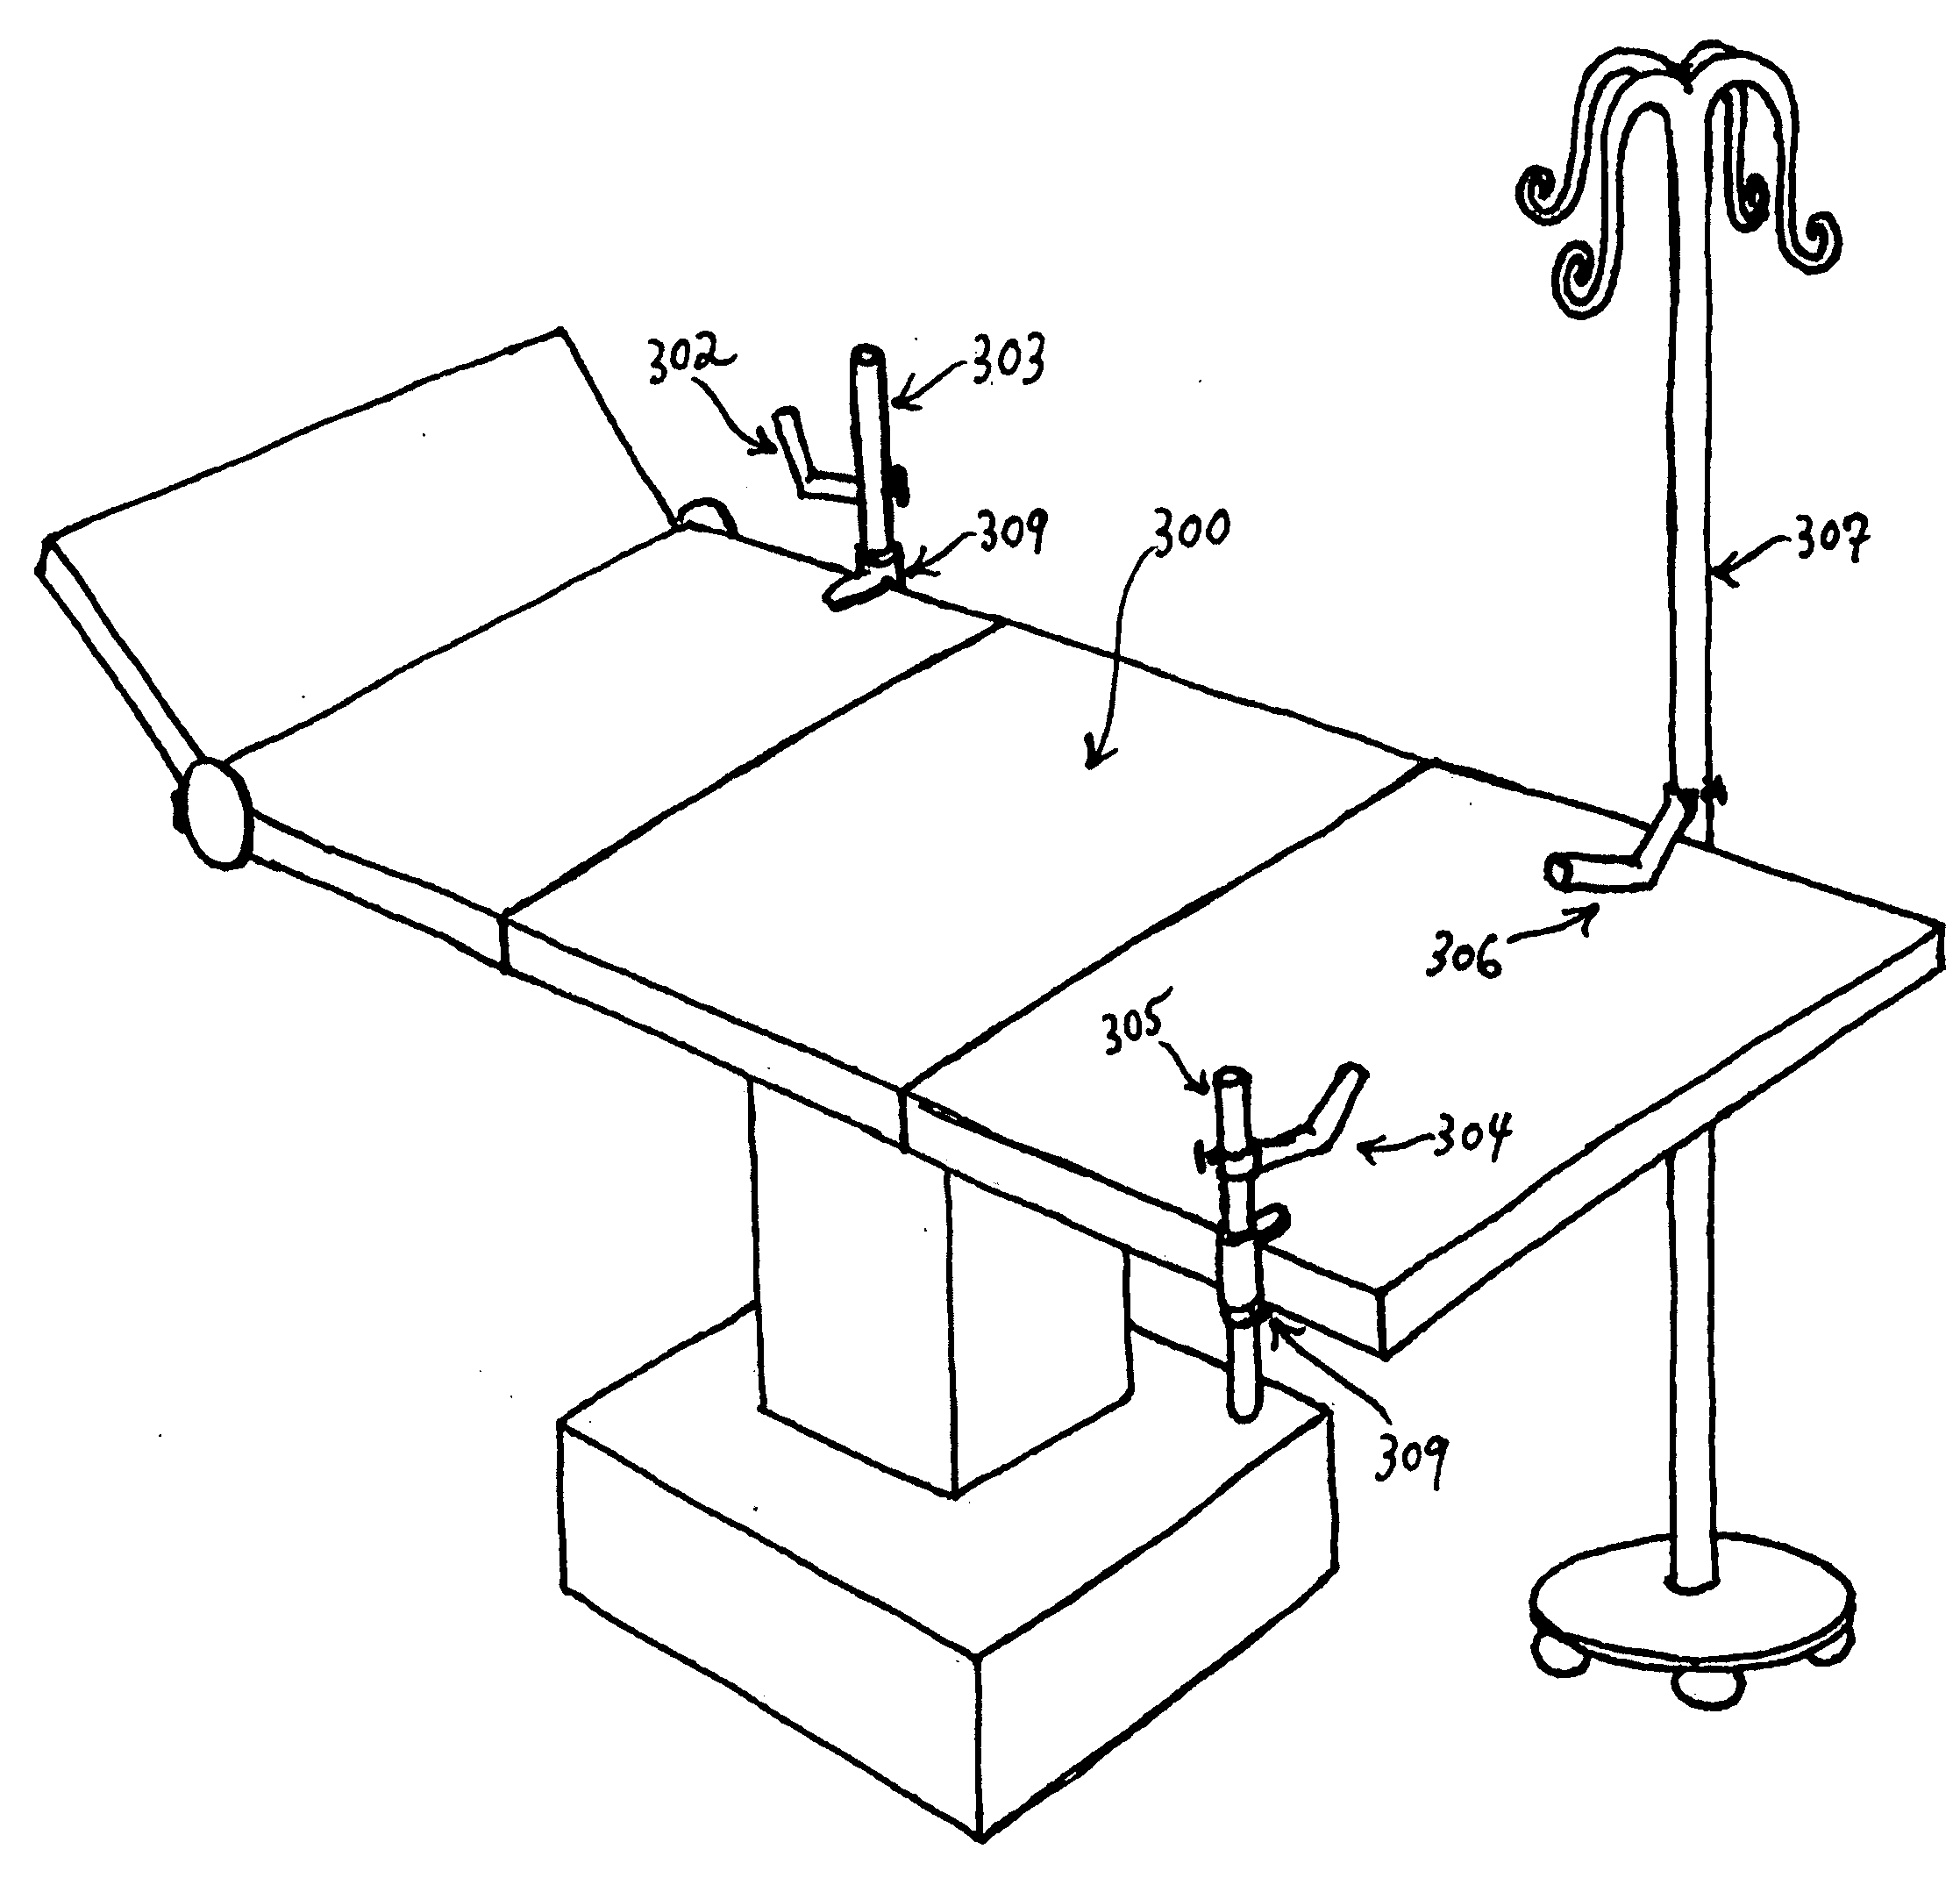 Medical device for supporting limbs